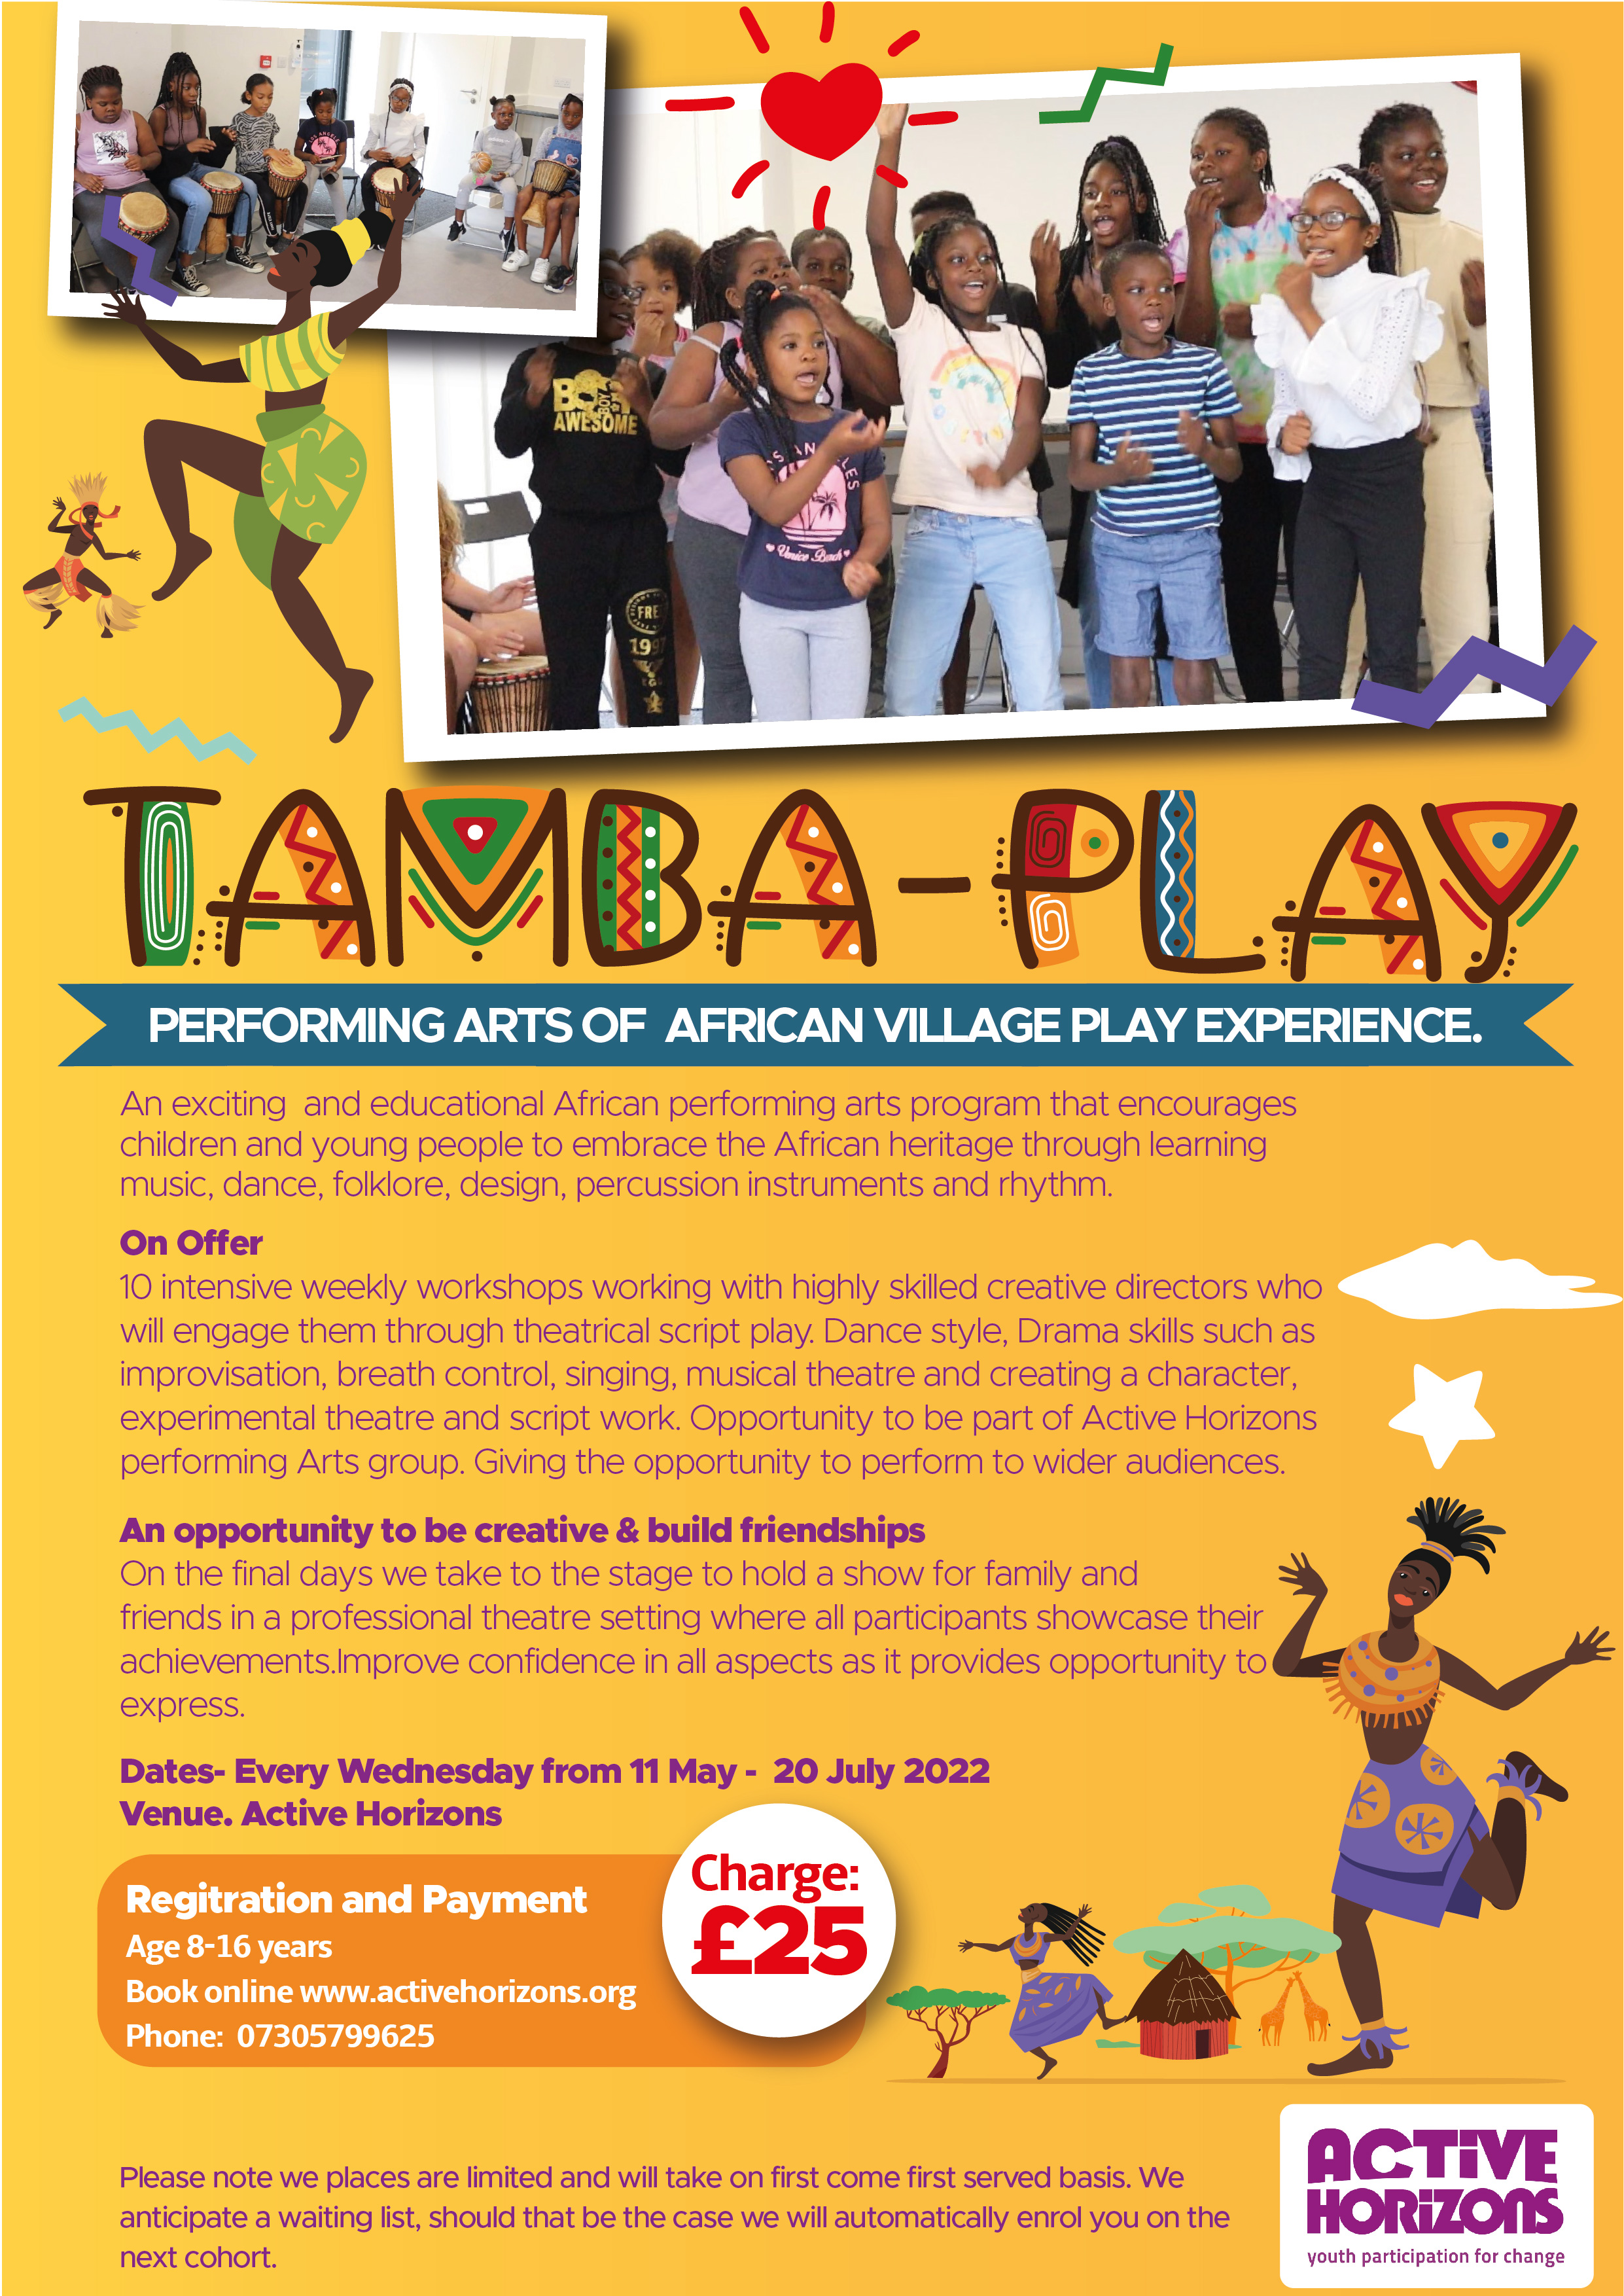 Tamba Play- PERFORMING ARTS OF AFRICAN VILLAGE PLAY EXPERIENCE